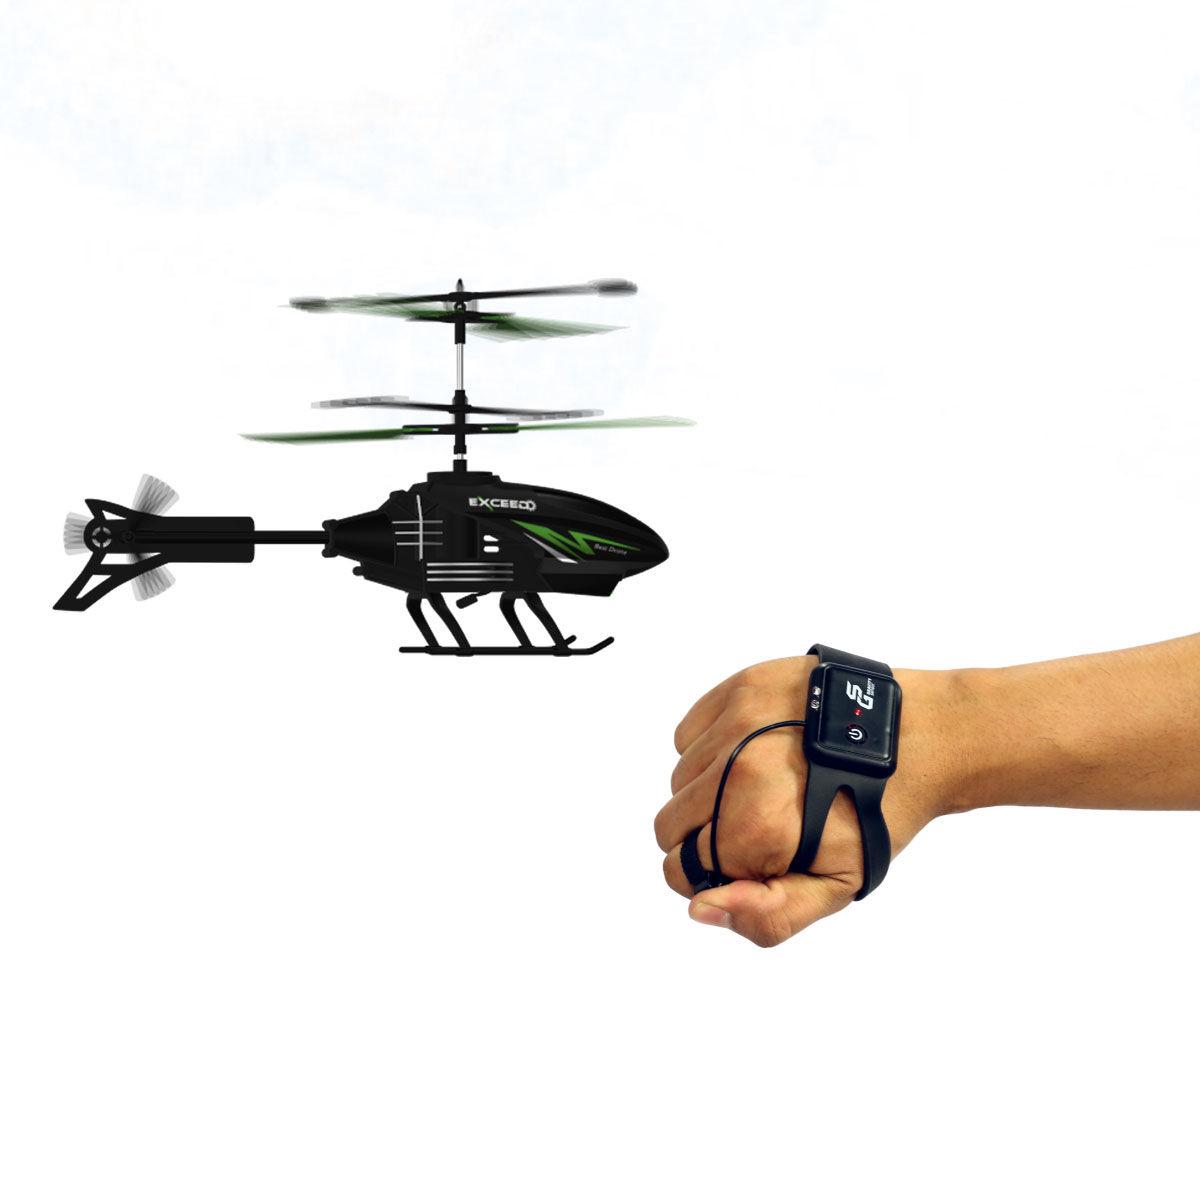 Sasta Remote Control Helicopter: Tips and Solutions for Maintaining a Sasta Remote Control Helicopter